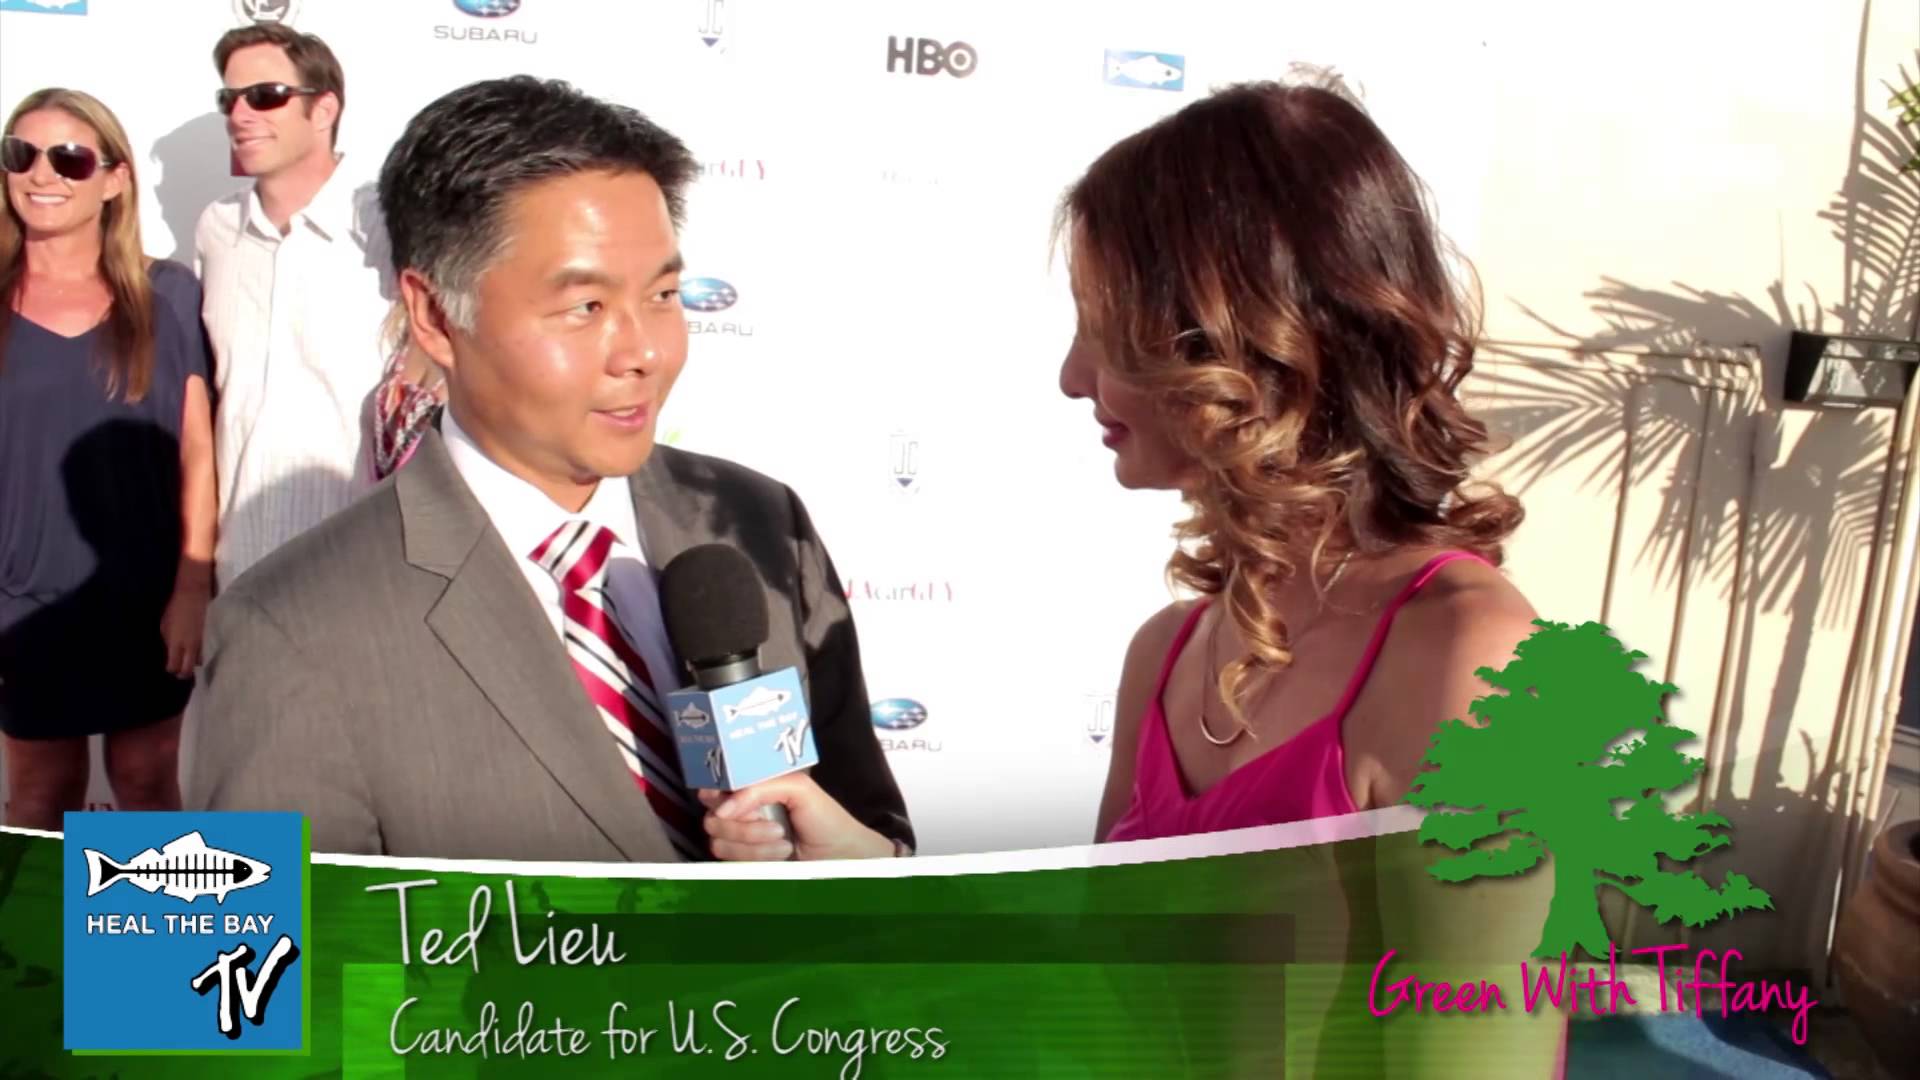 US Congress Candidate Ted Lieu Attends the Heal The Bay Gala